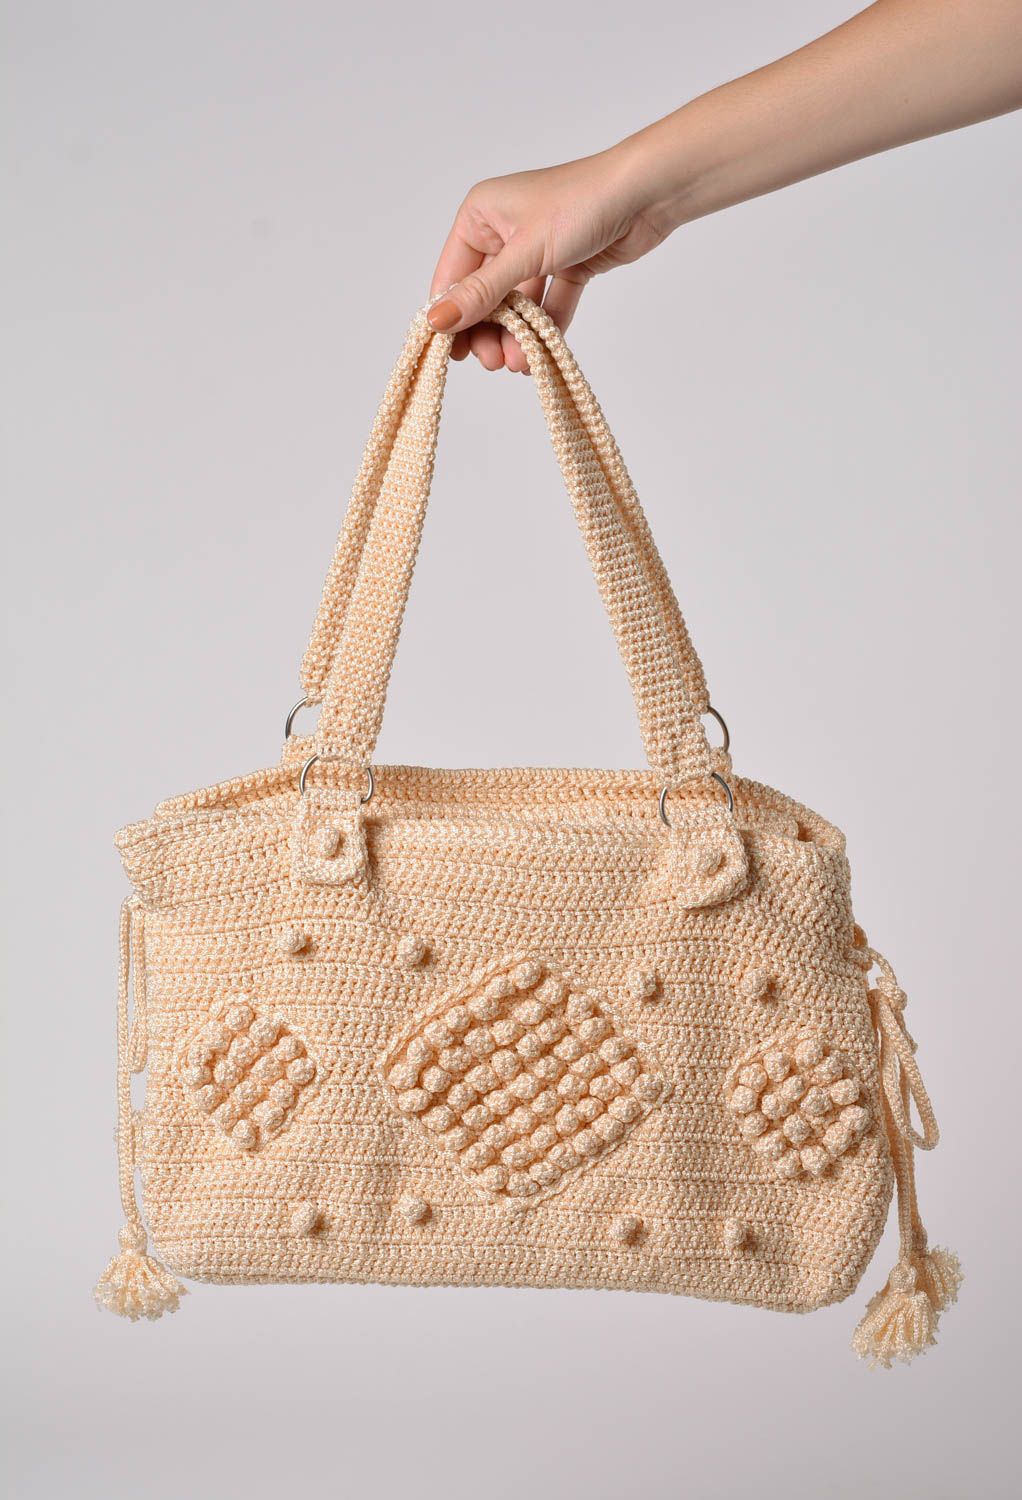 Crocheted female handbag of beige color with two handles summer stylish purse photo 2